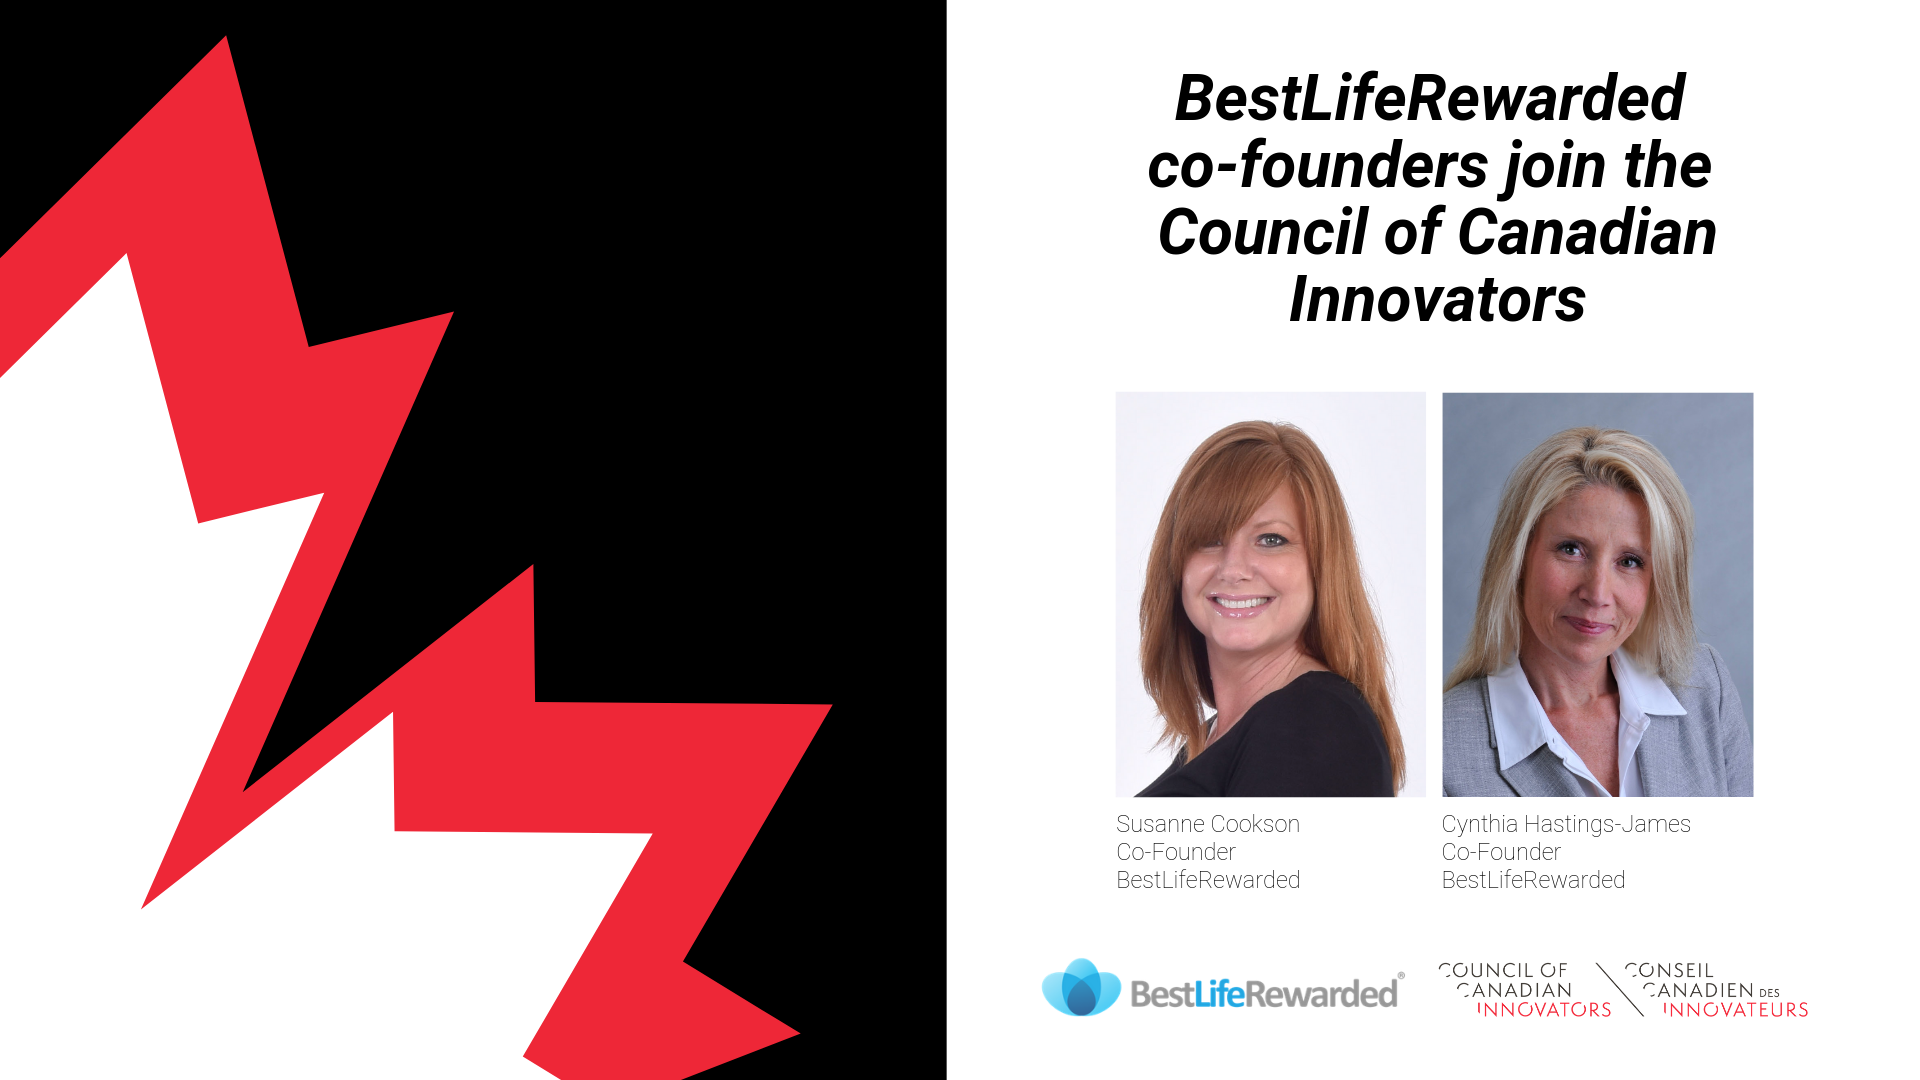 BestLifeRewarded joins the Council of Canadian Innovators